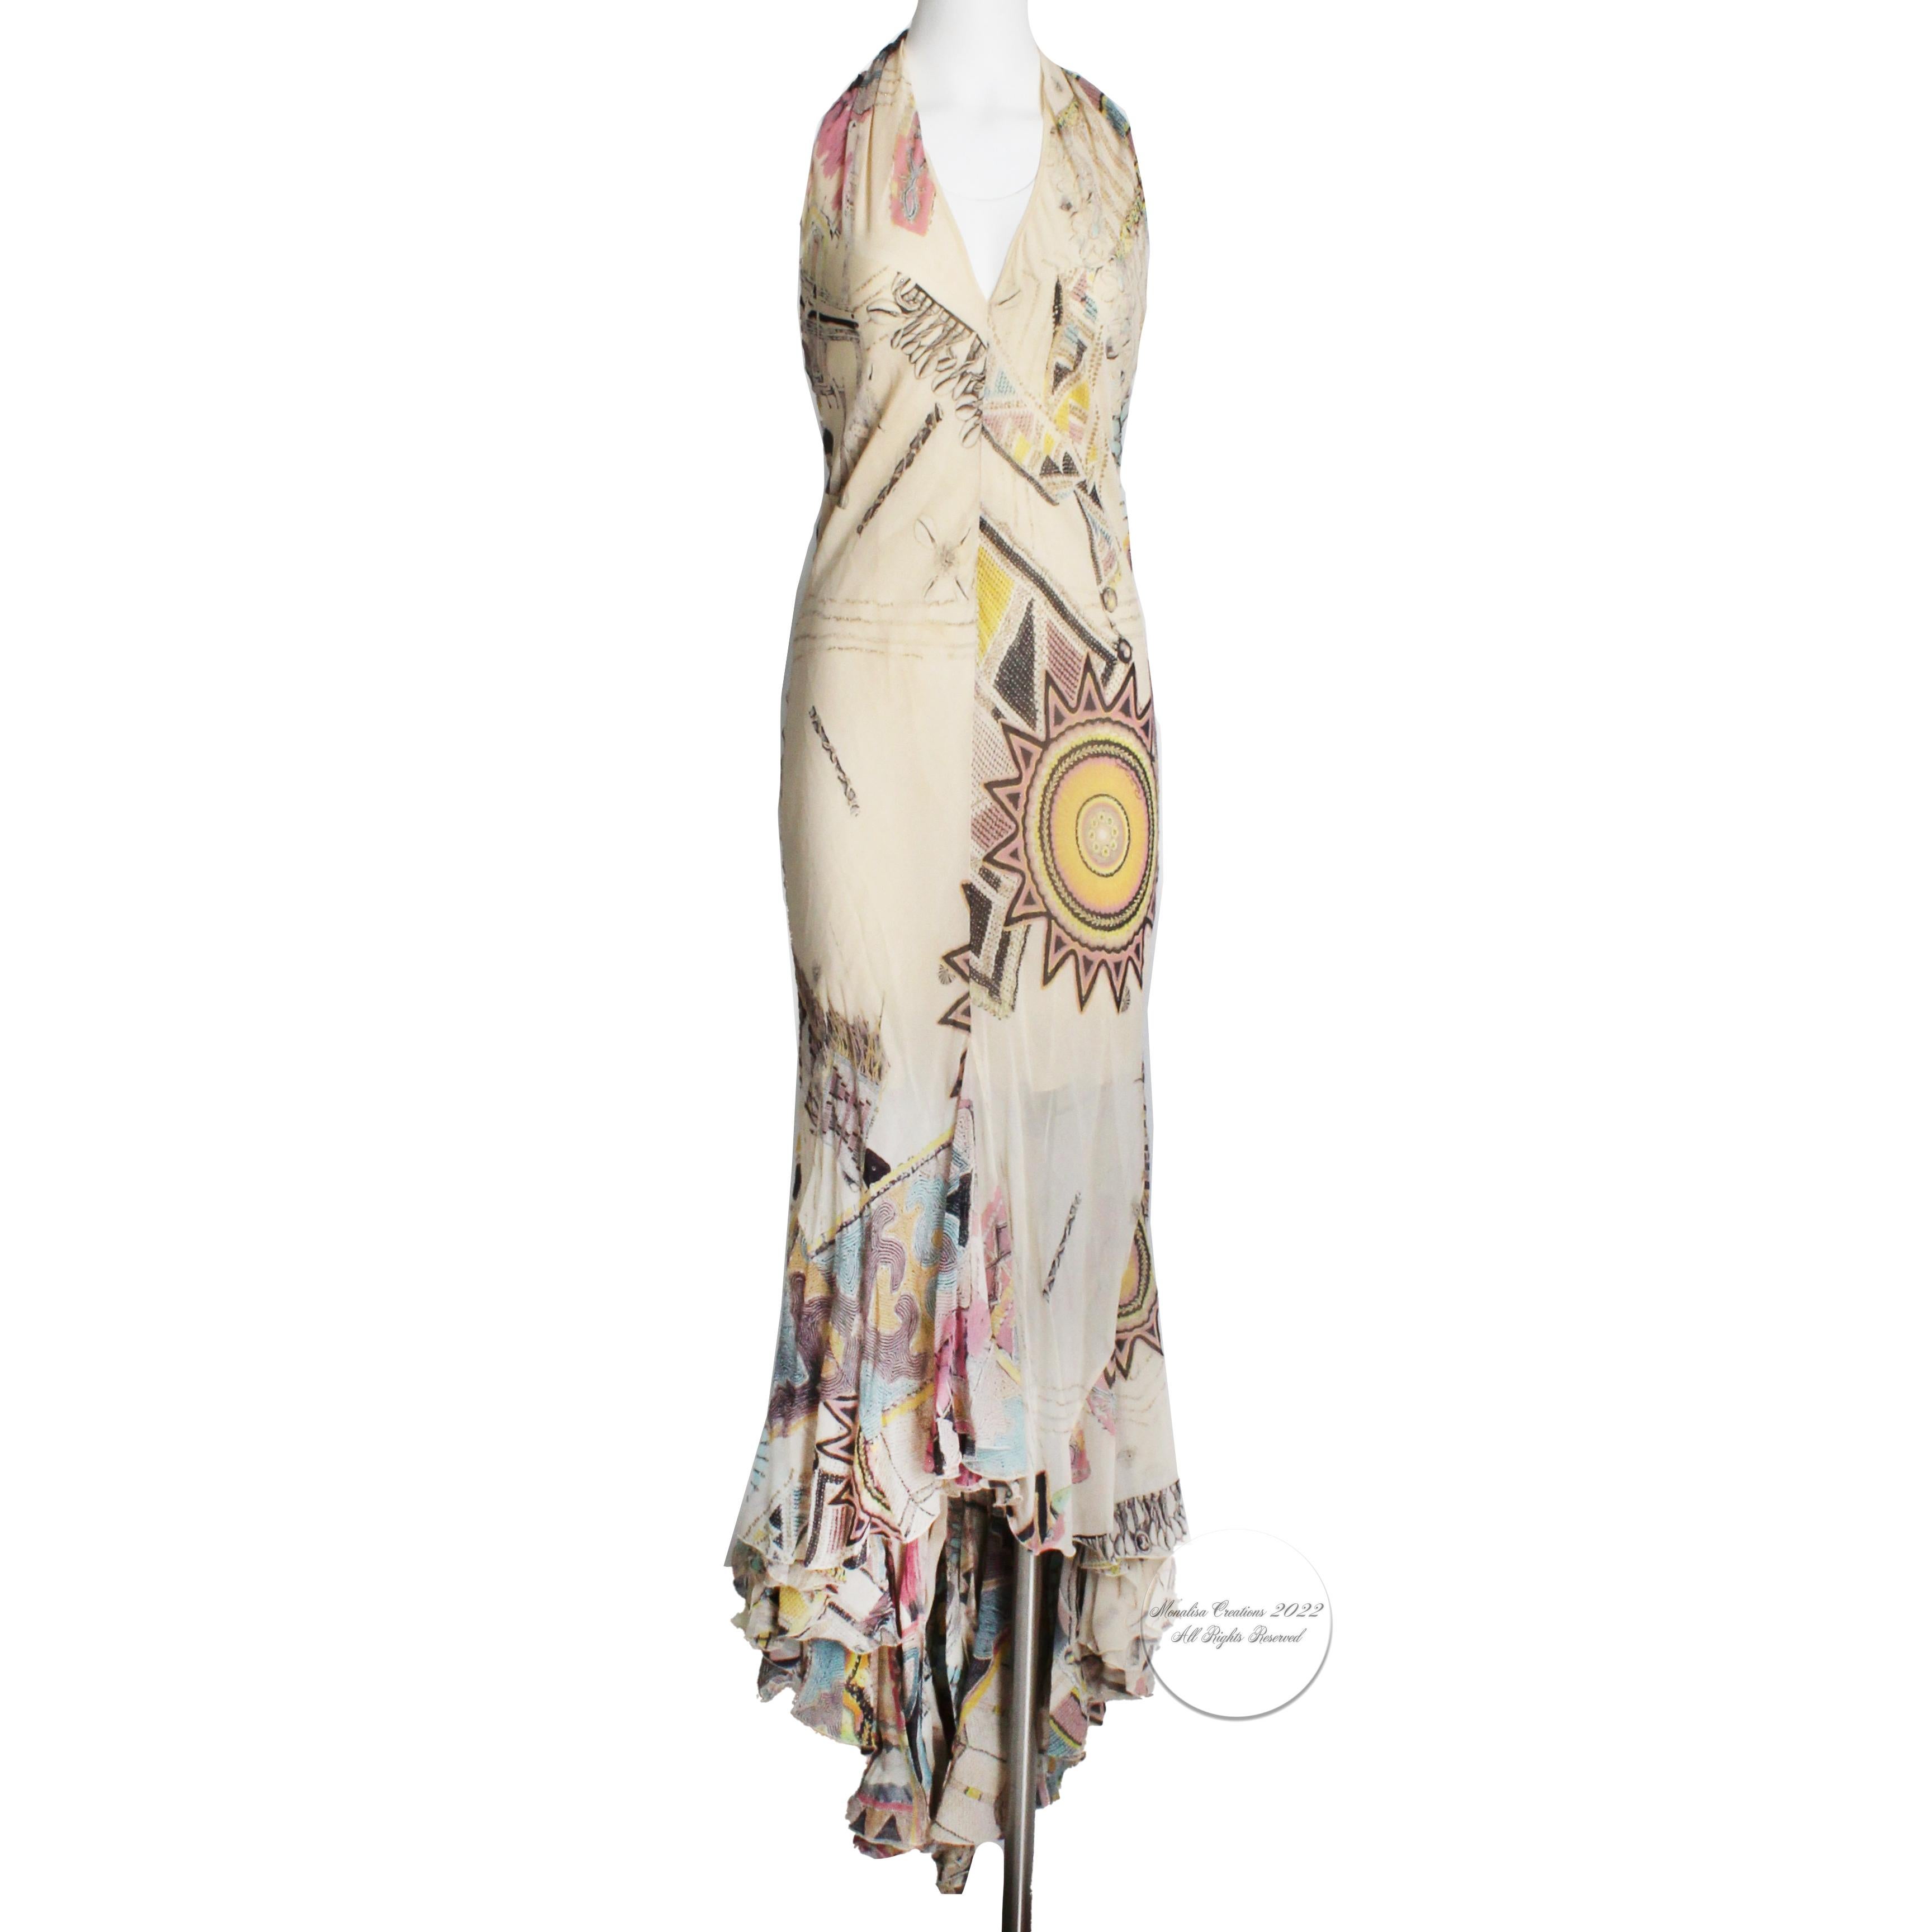 This lovely silk chiffon halter dress was made by Roberto Cavalli and previously owned by Serena Williams.  It features an abstract print with sunburst motif against a creme colored background and is partially lined to the mid-thigh.  The godet